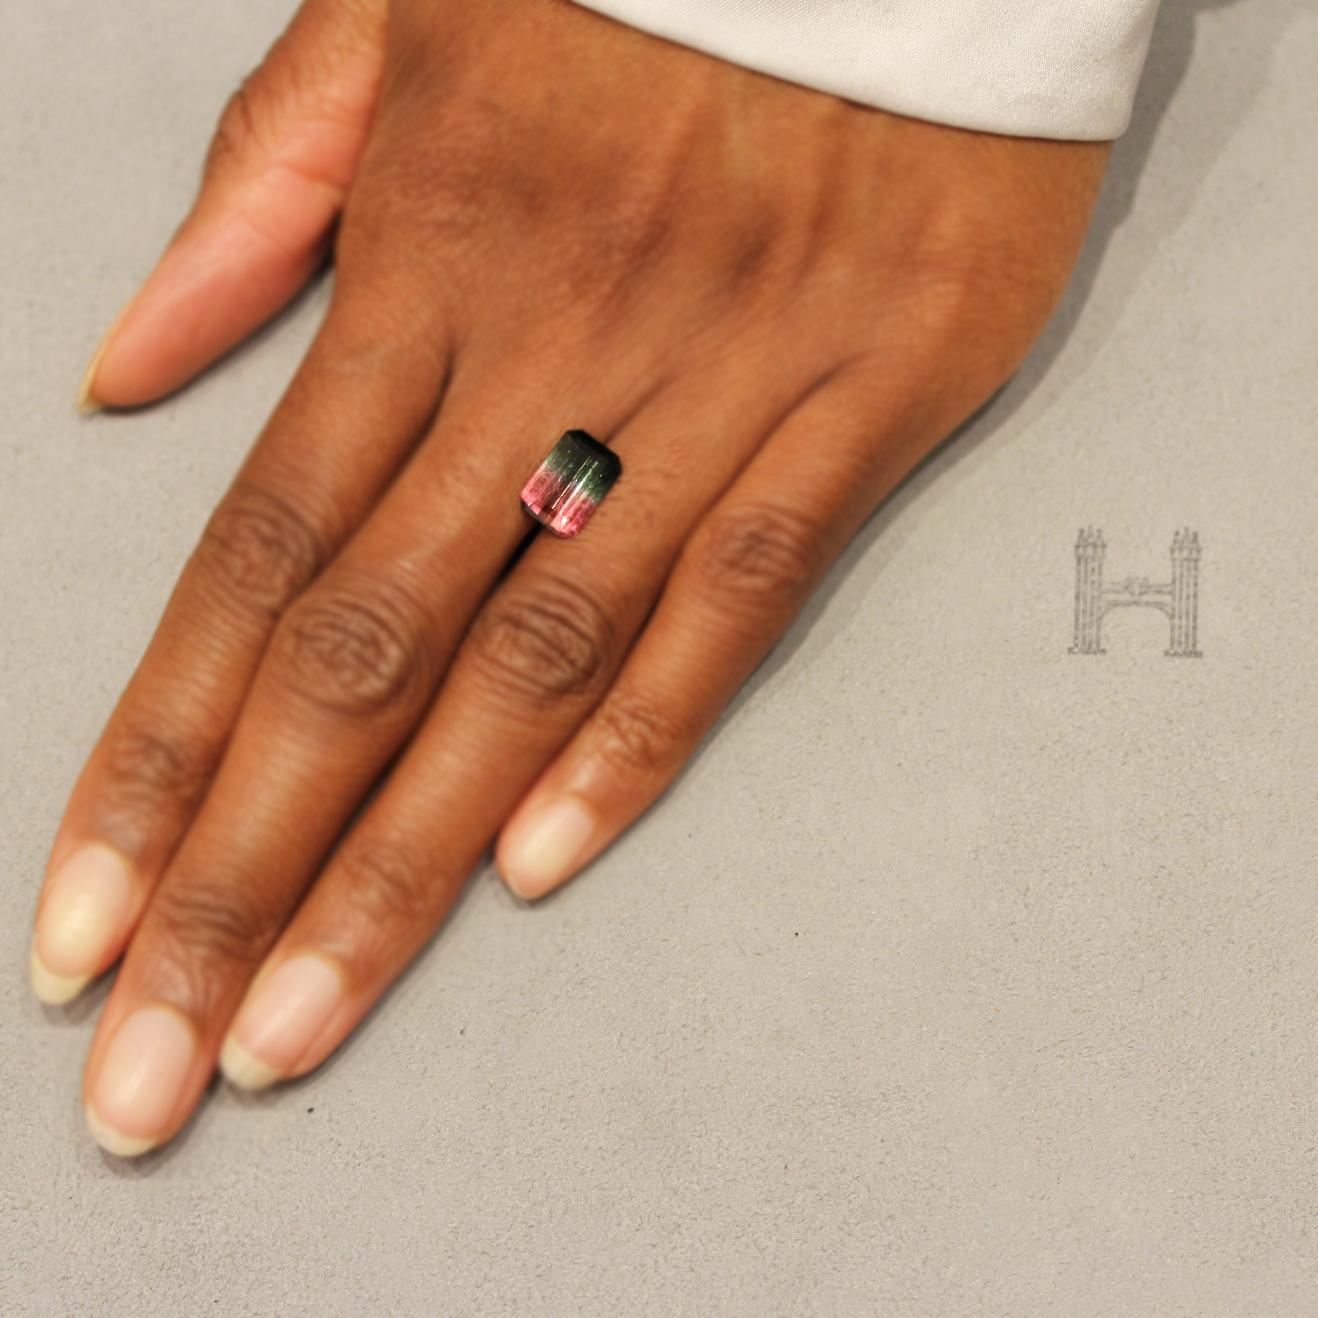 A stunning 3.45 carat bicolour emerald cut watermelon tourmaline from Brazil. This incredible gem features a perfect 50% / 50% colour split between green and pink. 

We have specialised in handmade, one-of-a-kind pieces of jewellery since 1980. All